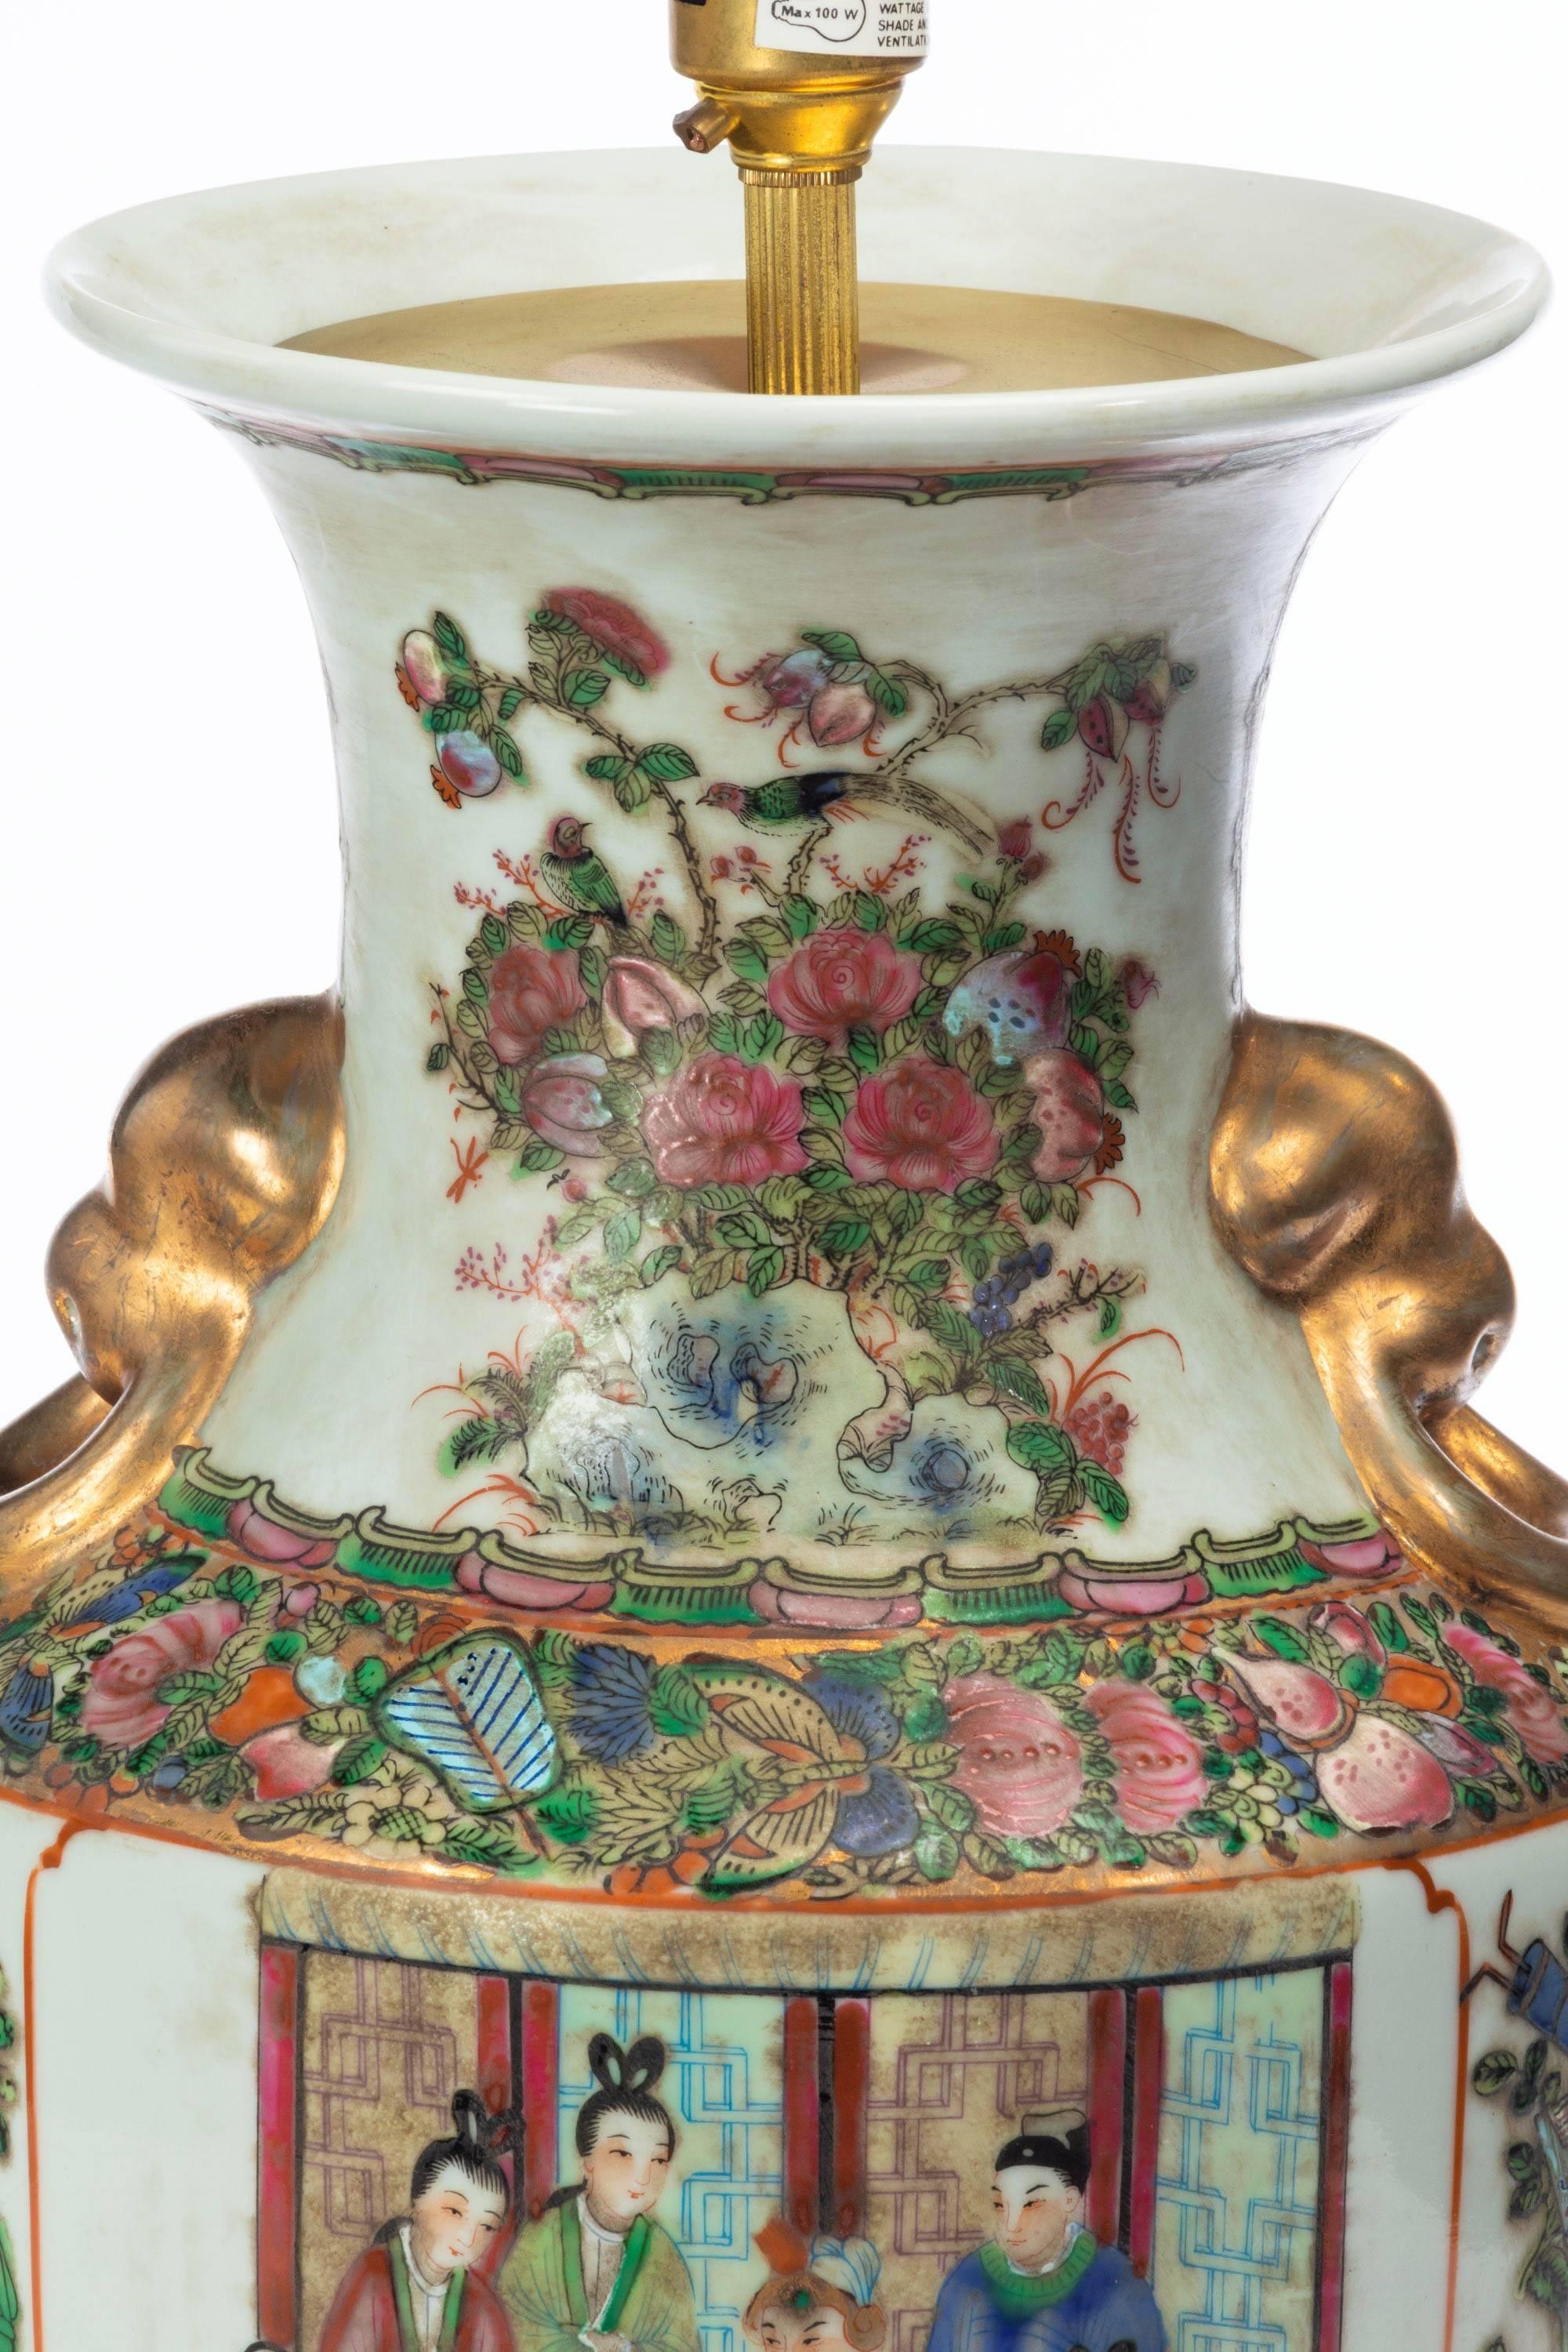 A good 19th century Cantonese, porcelain lamp with court scenes and elaborate gilded and floral decoration. Now converted to a lamp, mid-19th century.

Canton porcelains are Chinese ceramic wares made for export in the 18th-20th centuries. The wares